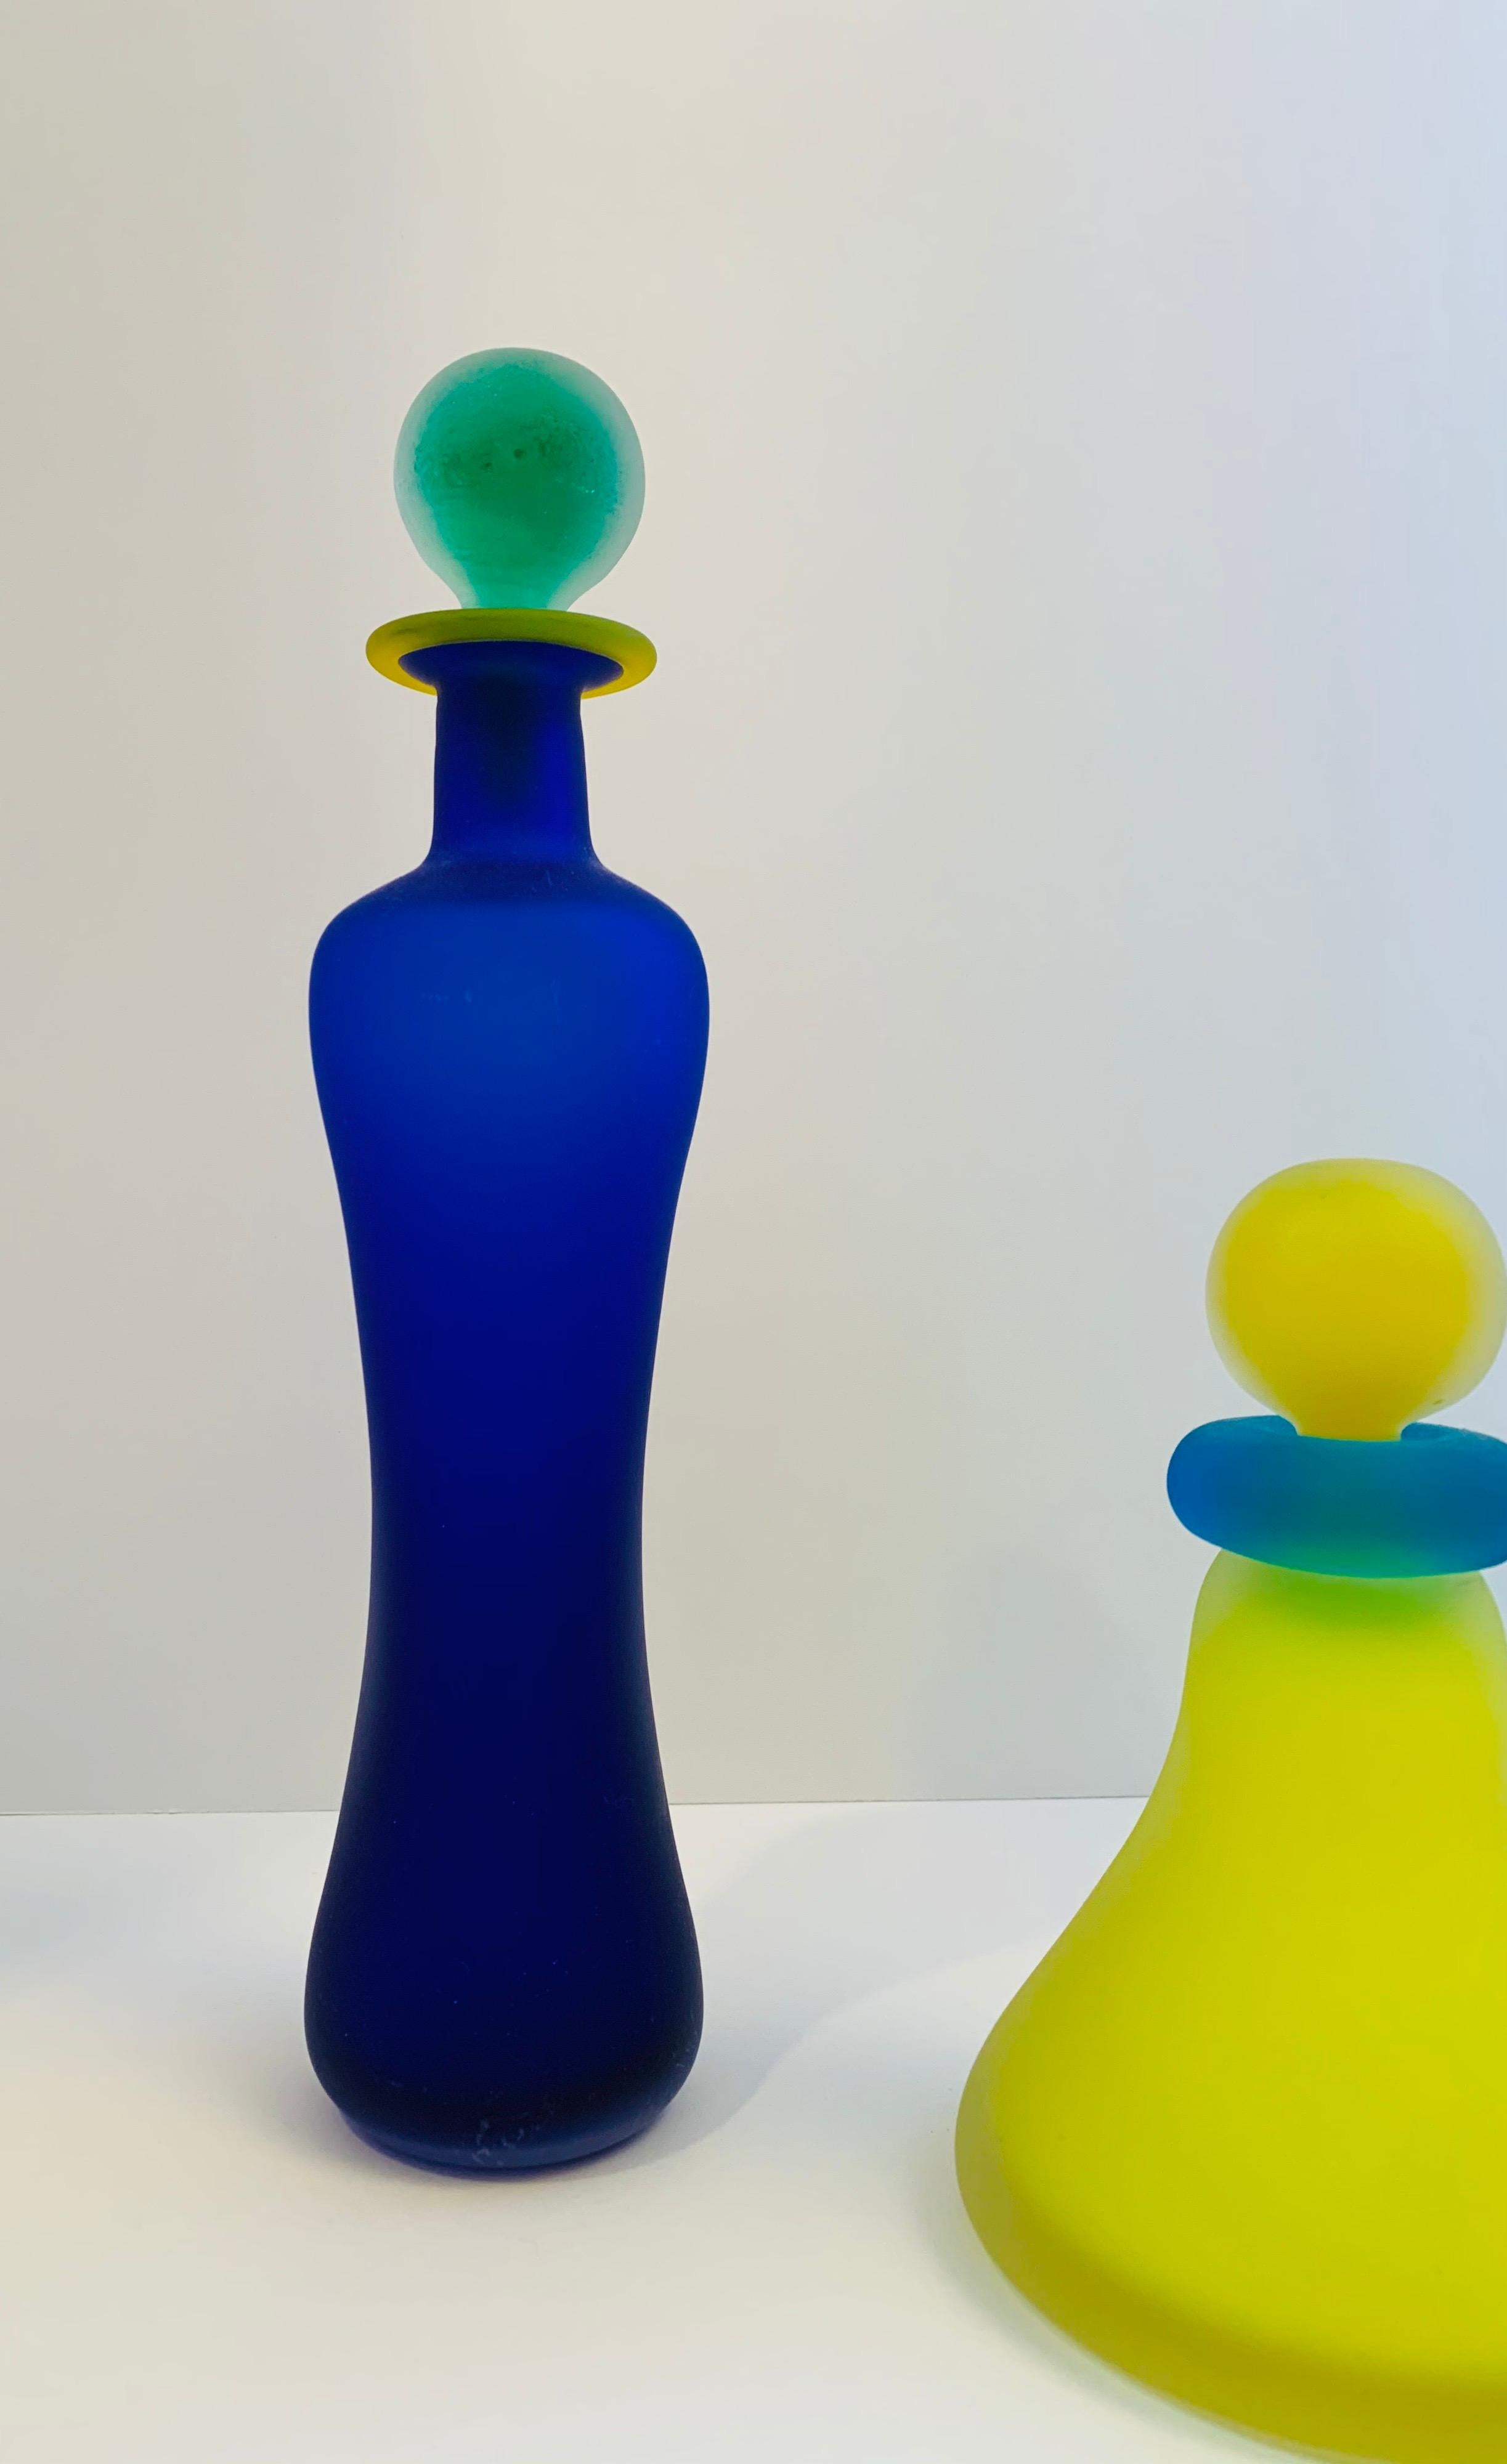 A playful yet precious trio of Italian Art Glass perfume bottles.

These modernist beauties are done in vivid colors with a soft sanded 